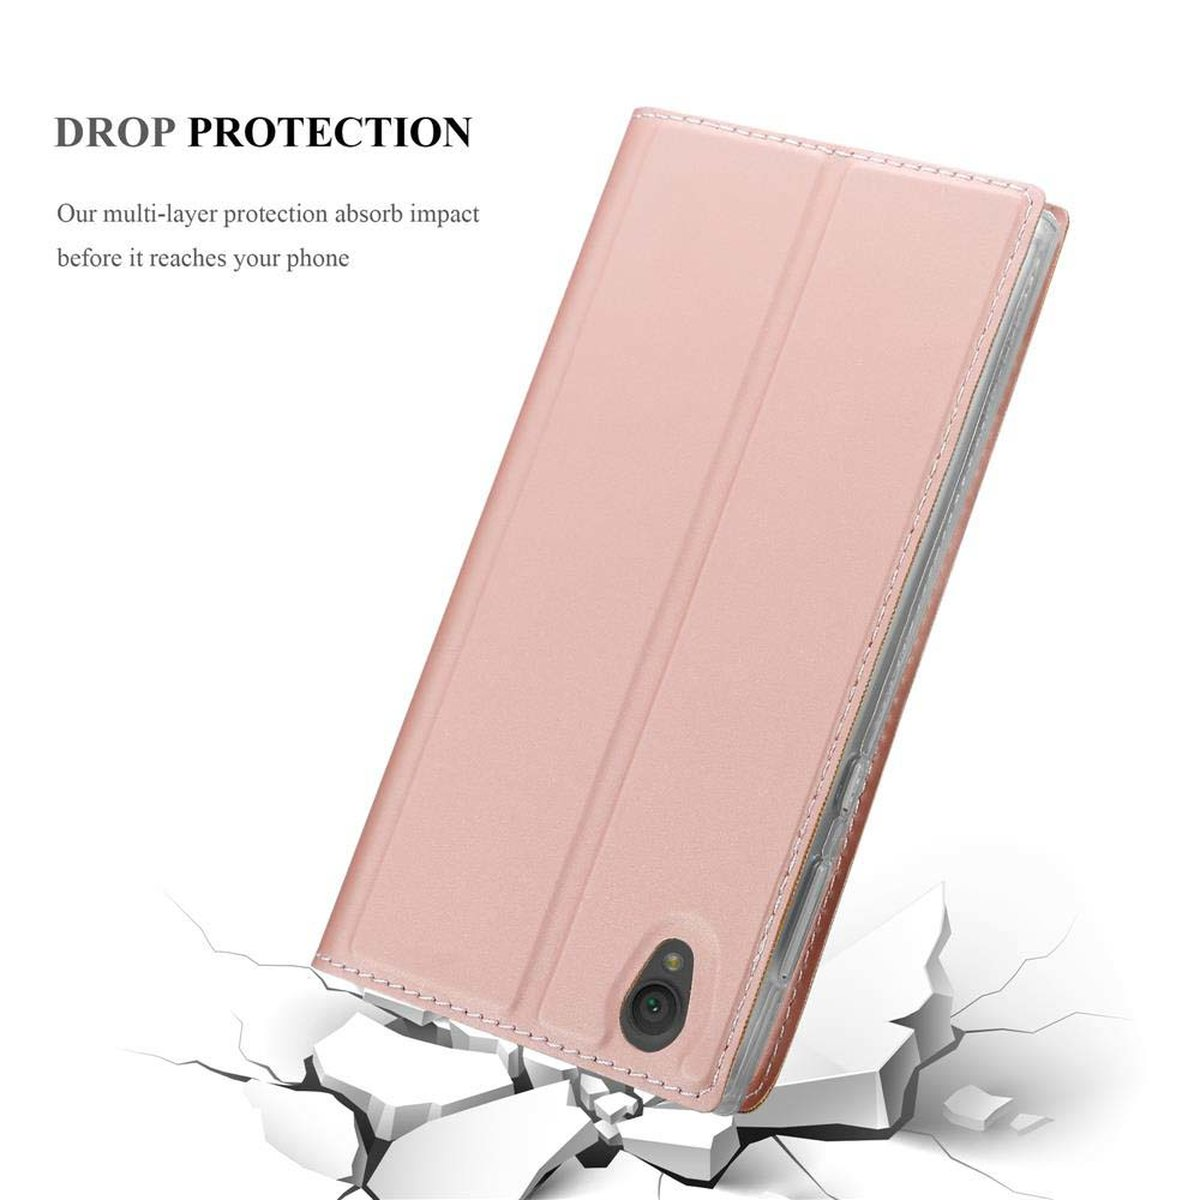 Classy L1, Bookcover, ROSÉ Style, GOLD Sony, CLASSY Xperia CADORABO Handyhülle Book